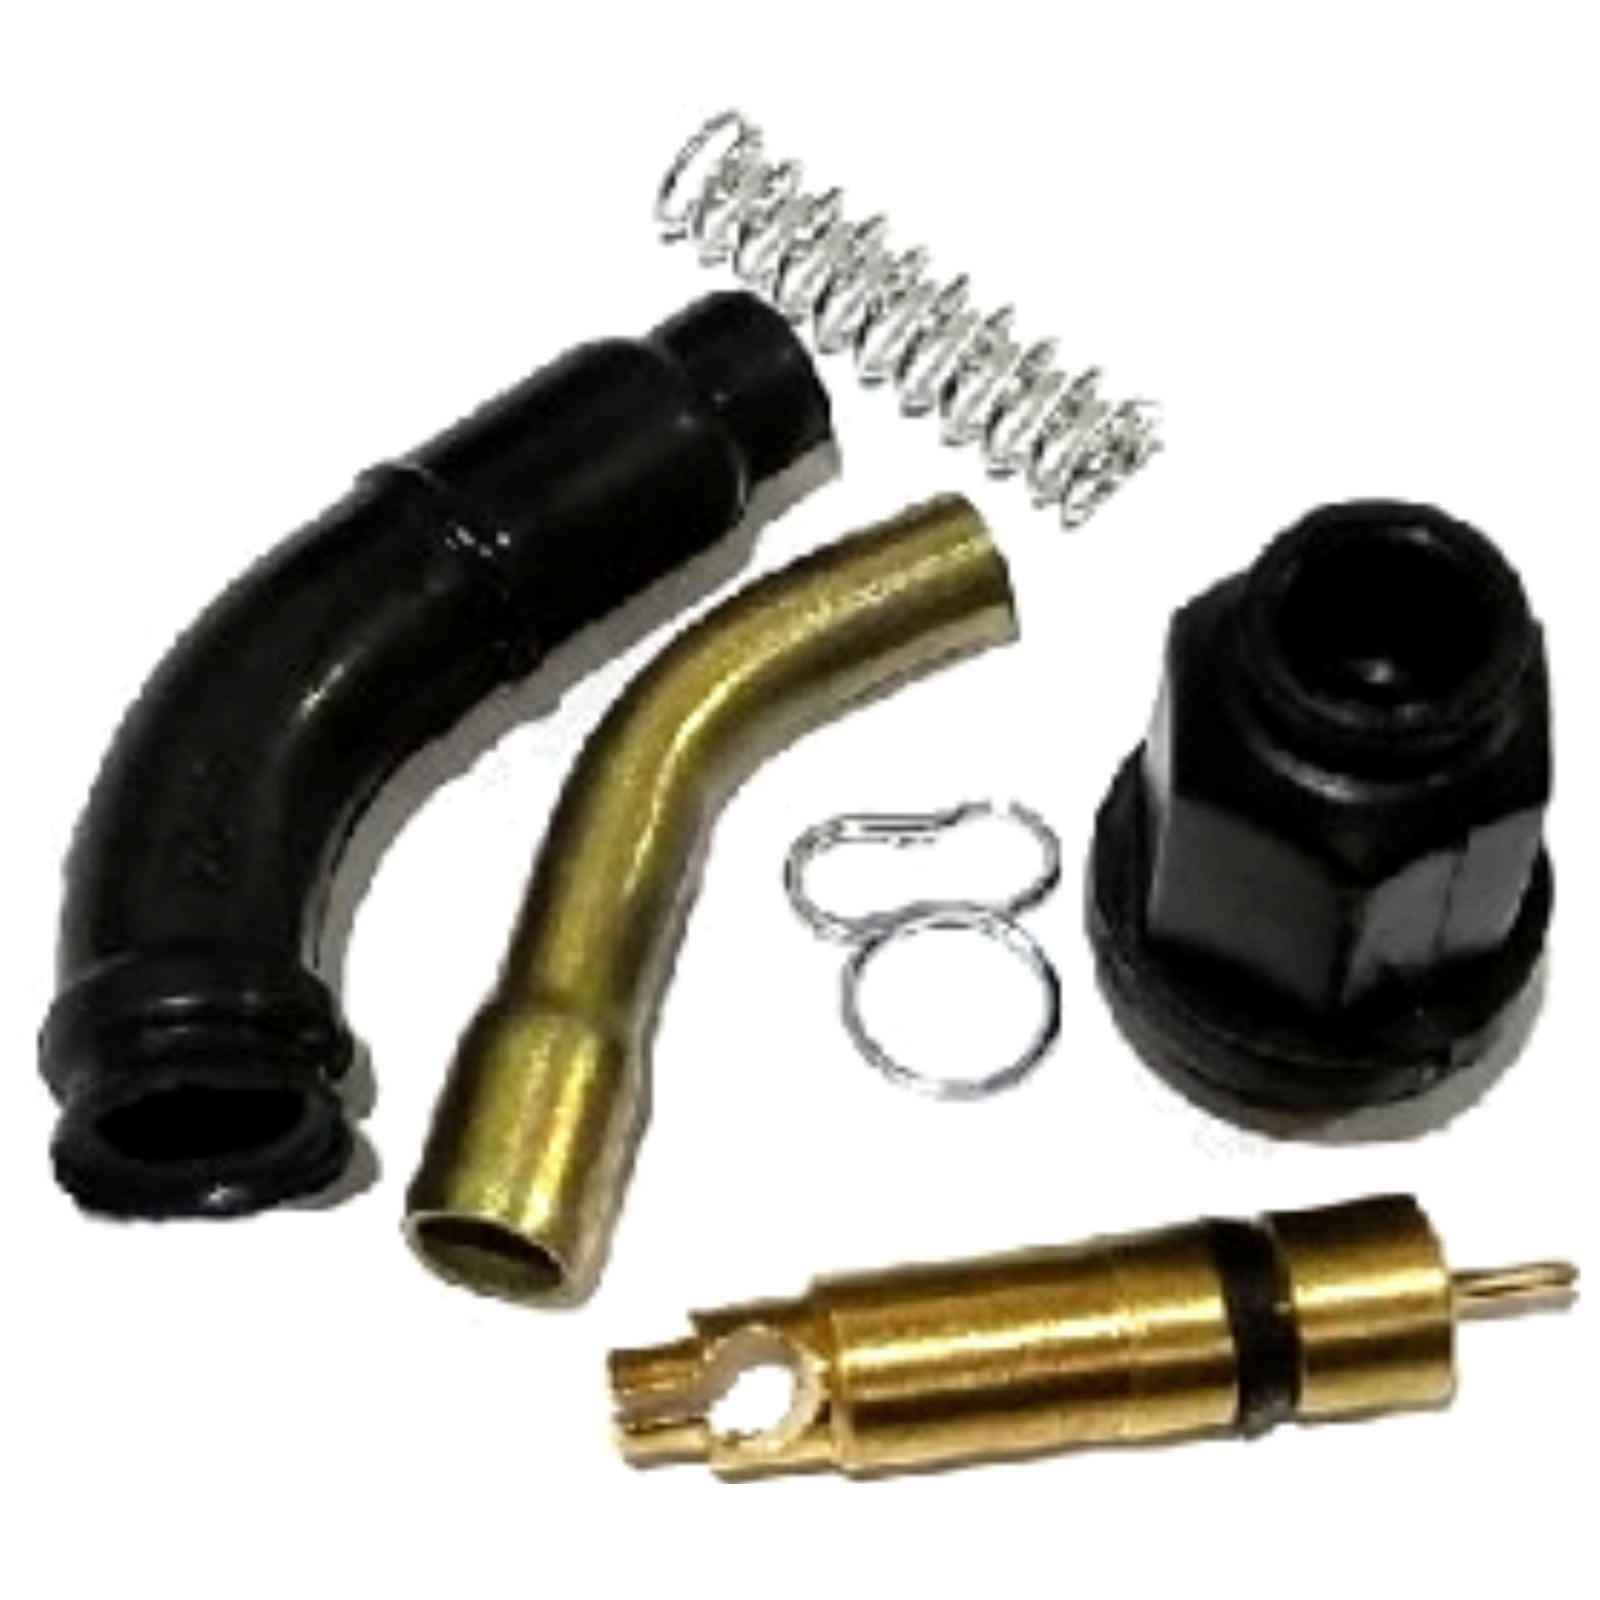 Choke Cable and Starter Valve Plunger Kit Compatible With Honda TRX450 Foreman 450 1998-2004 